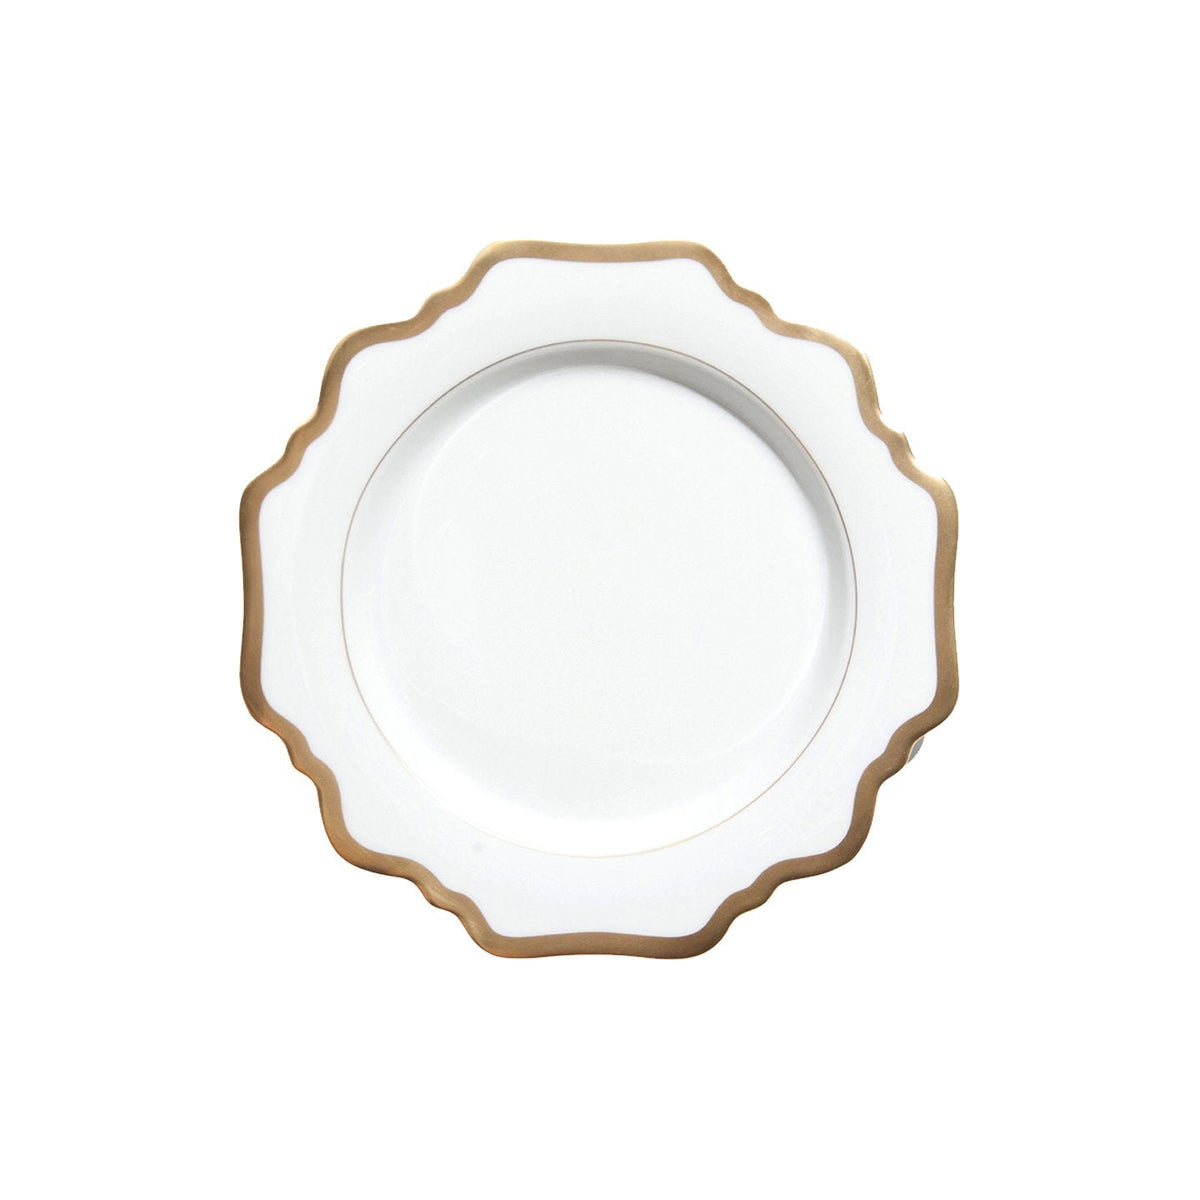 Antique White and Gold Bread Plate